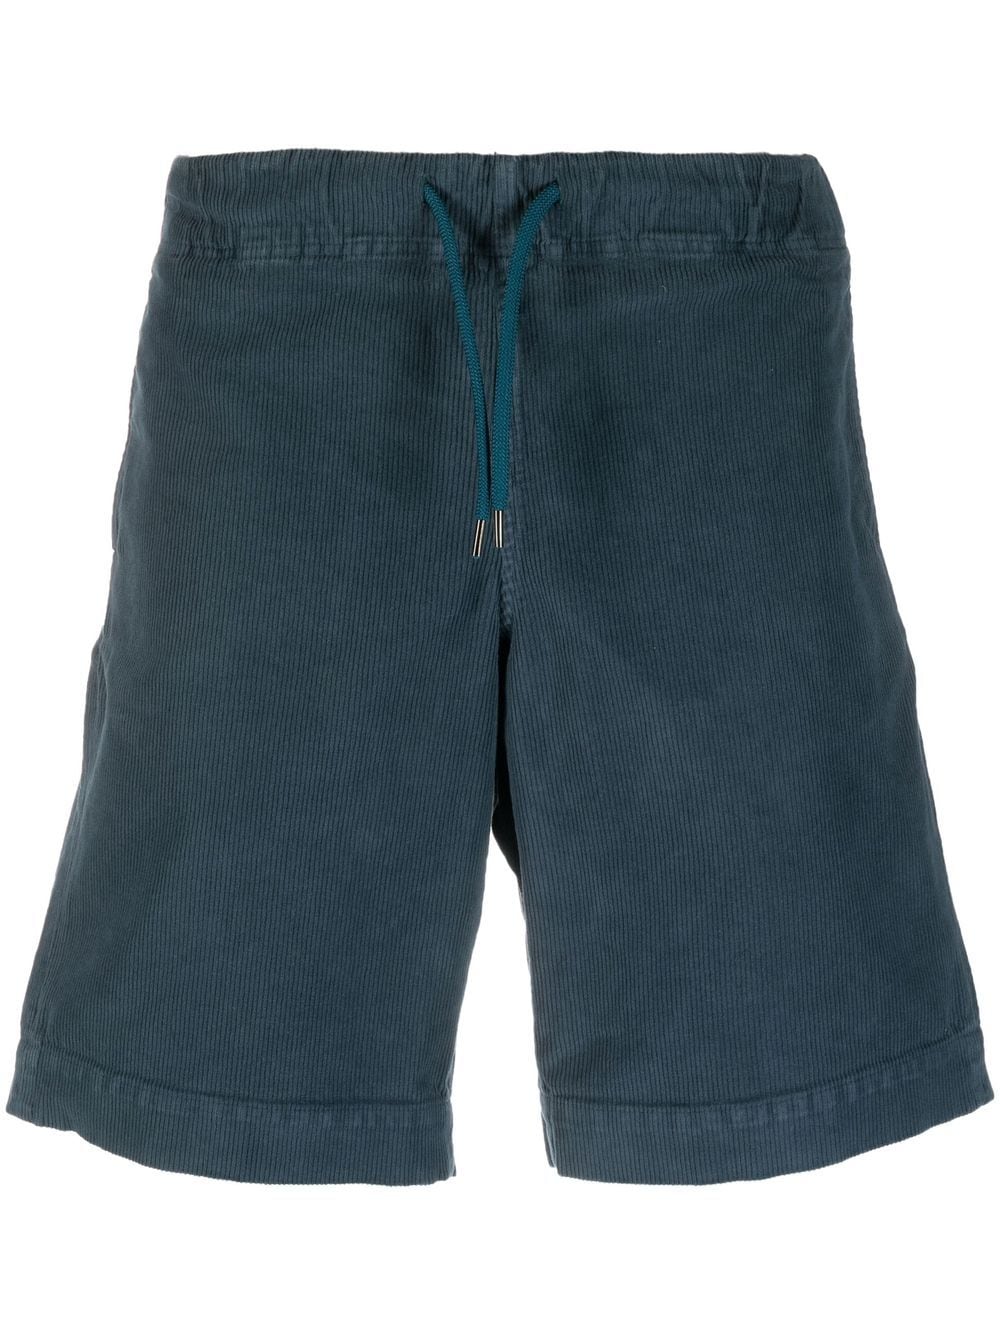 PS BY PAUL SMITH CORDUROY DECK SHORTS